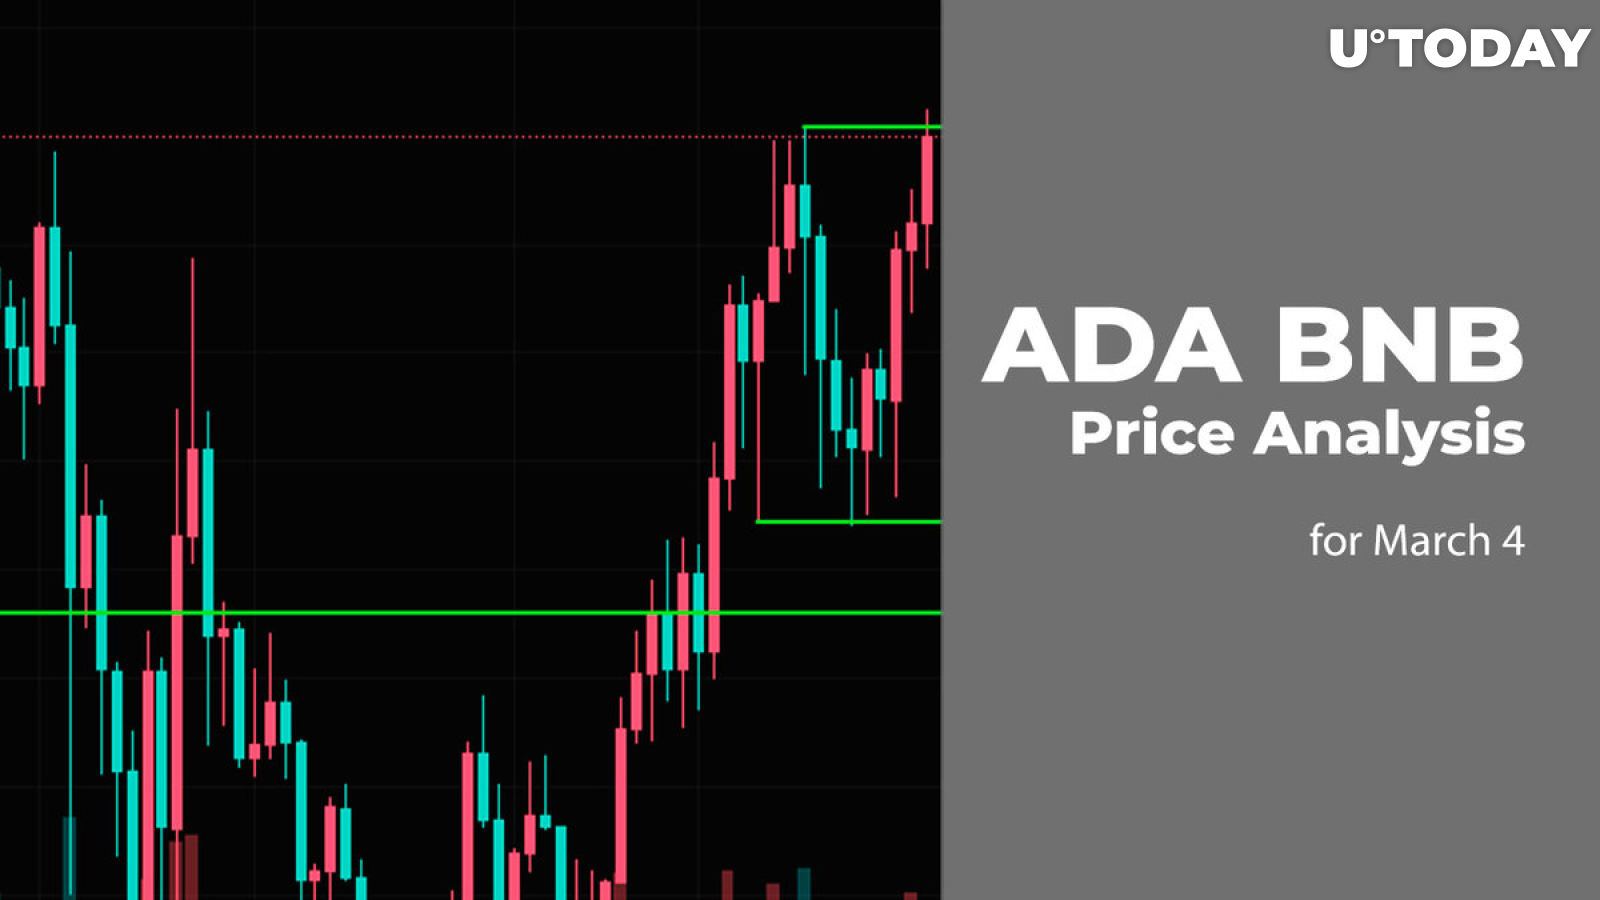 ADA and BNB Price Prediction for March 4